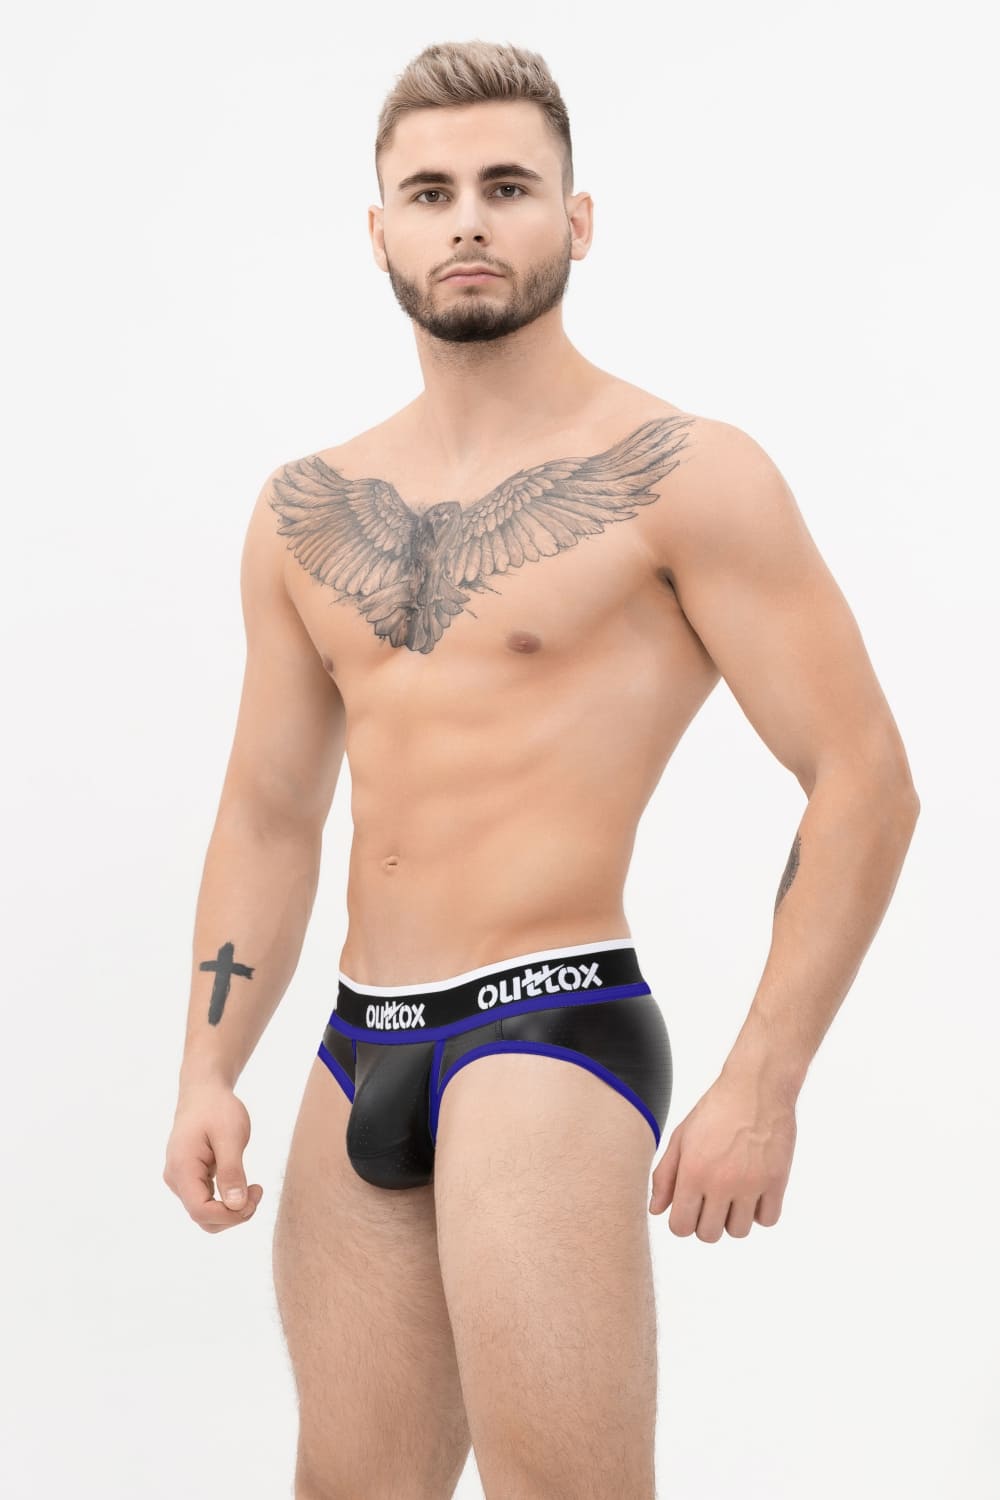 Outtox. Wrapped Rear Briefs with Snap Codpiece. Black+Blue &